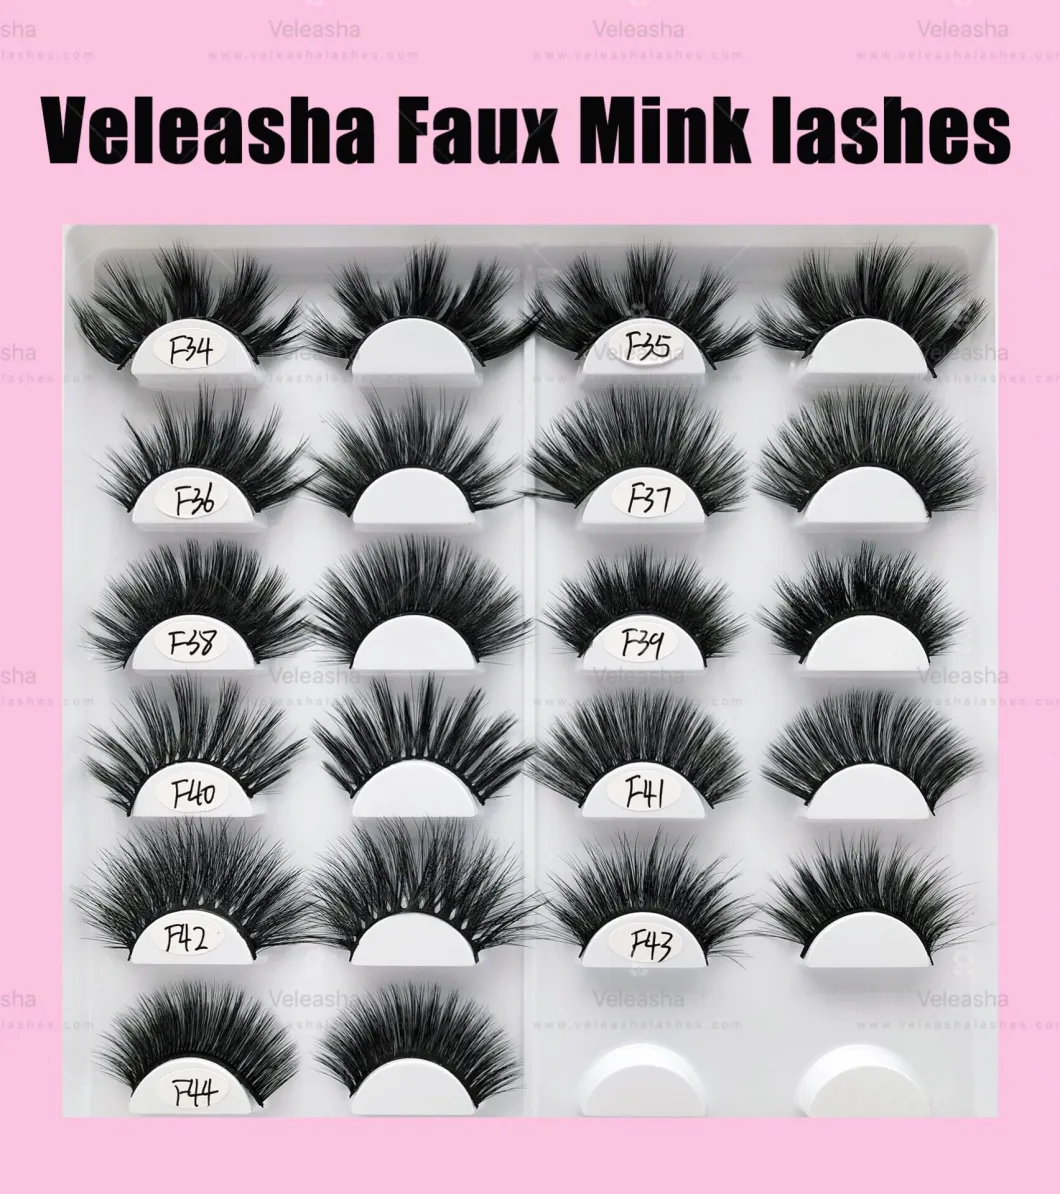 Wholesale Mink Lashes Private Label Faux Mink Eyelashes with Custom Packaging